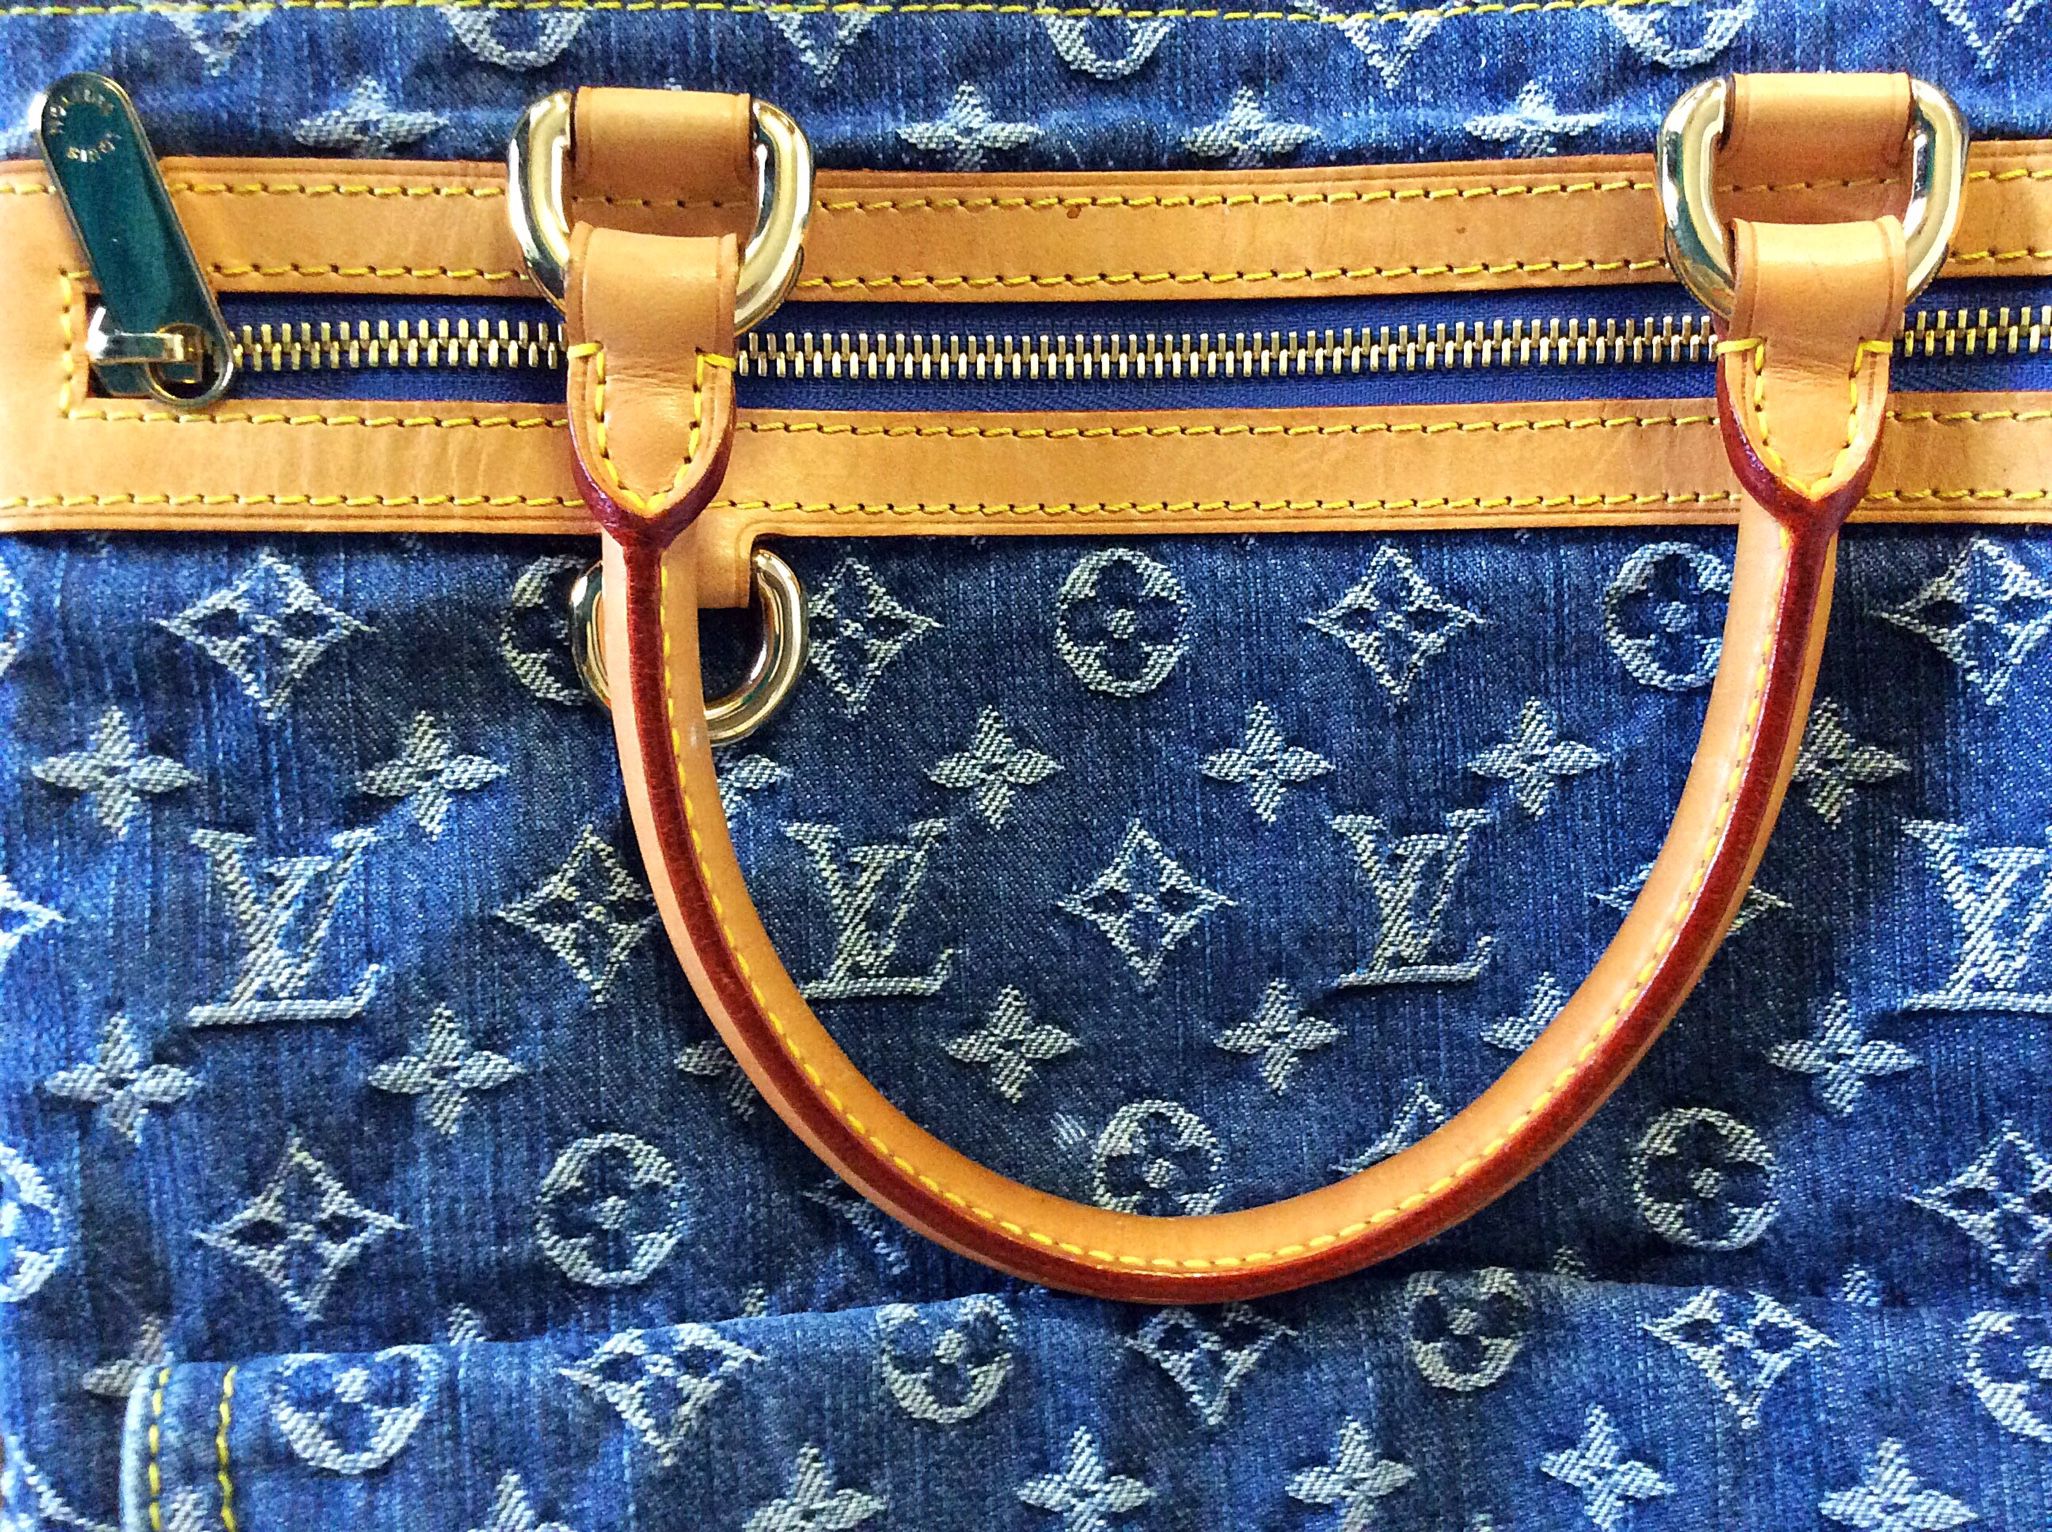 Vintage Louis Vuitton Denim Bag for Sale in Tracy, CA - OfferUp